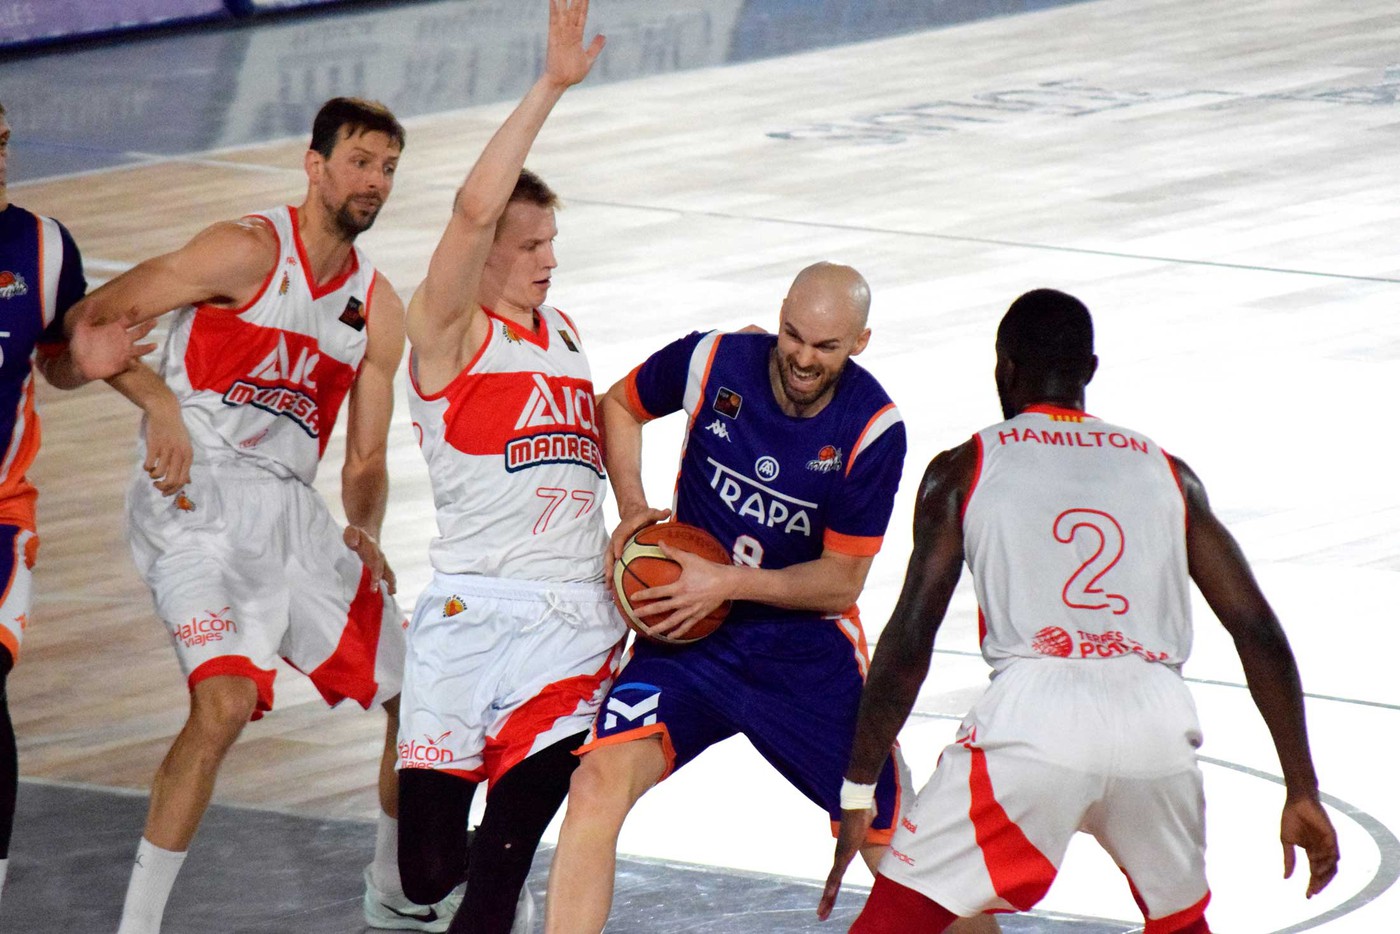 ICL Manresa makes the best game of the series and is planted in the final (76-83)